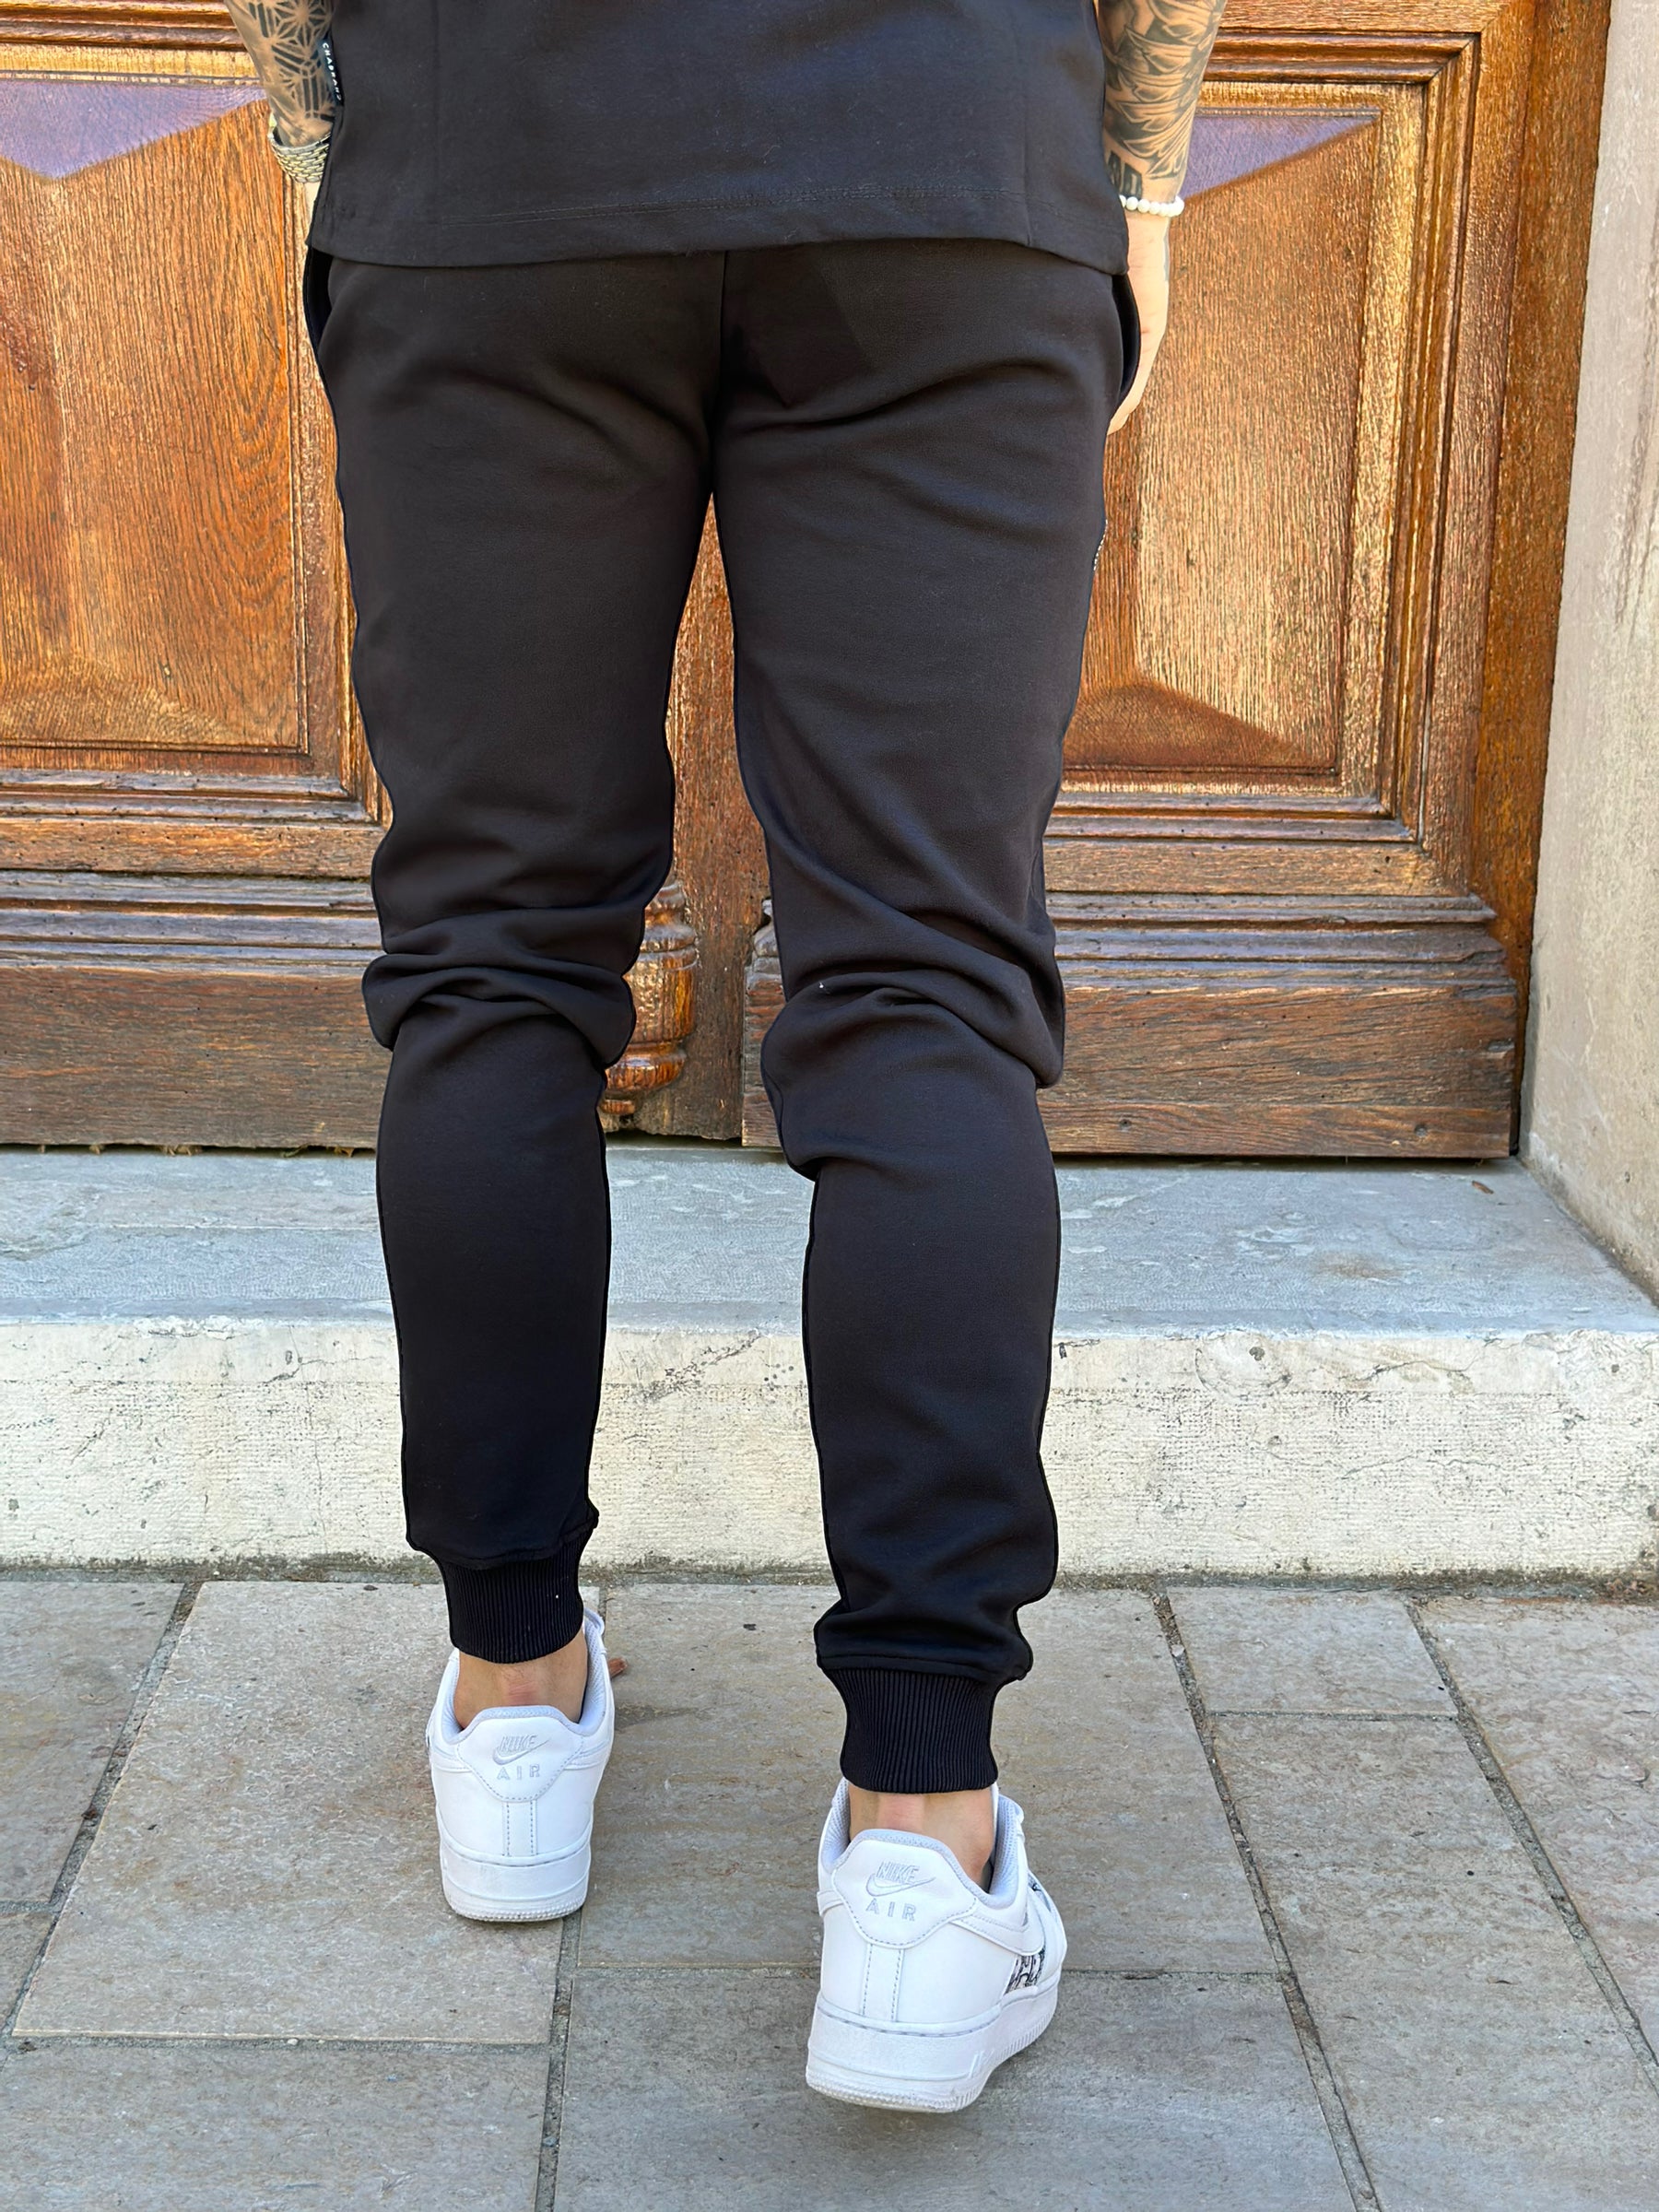 CHABRAND - Black jogging pants with small white sign